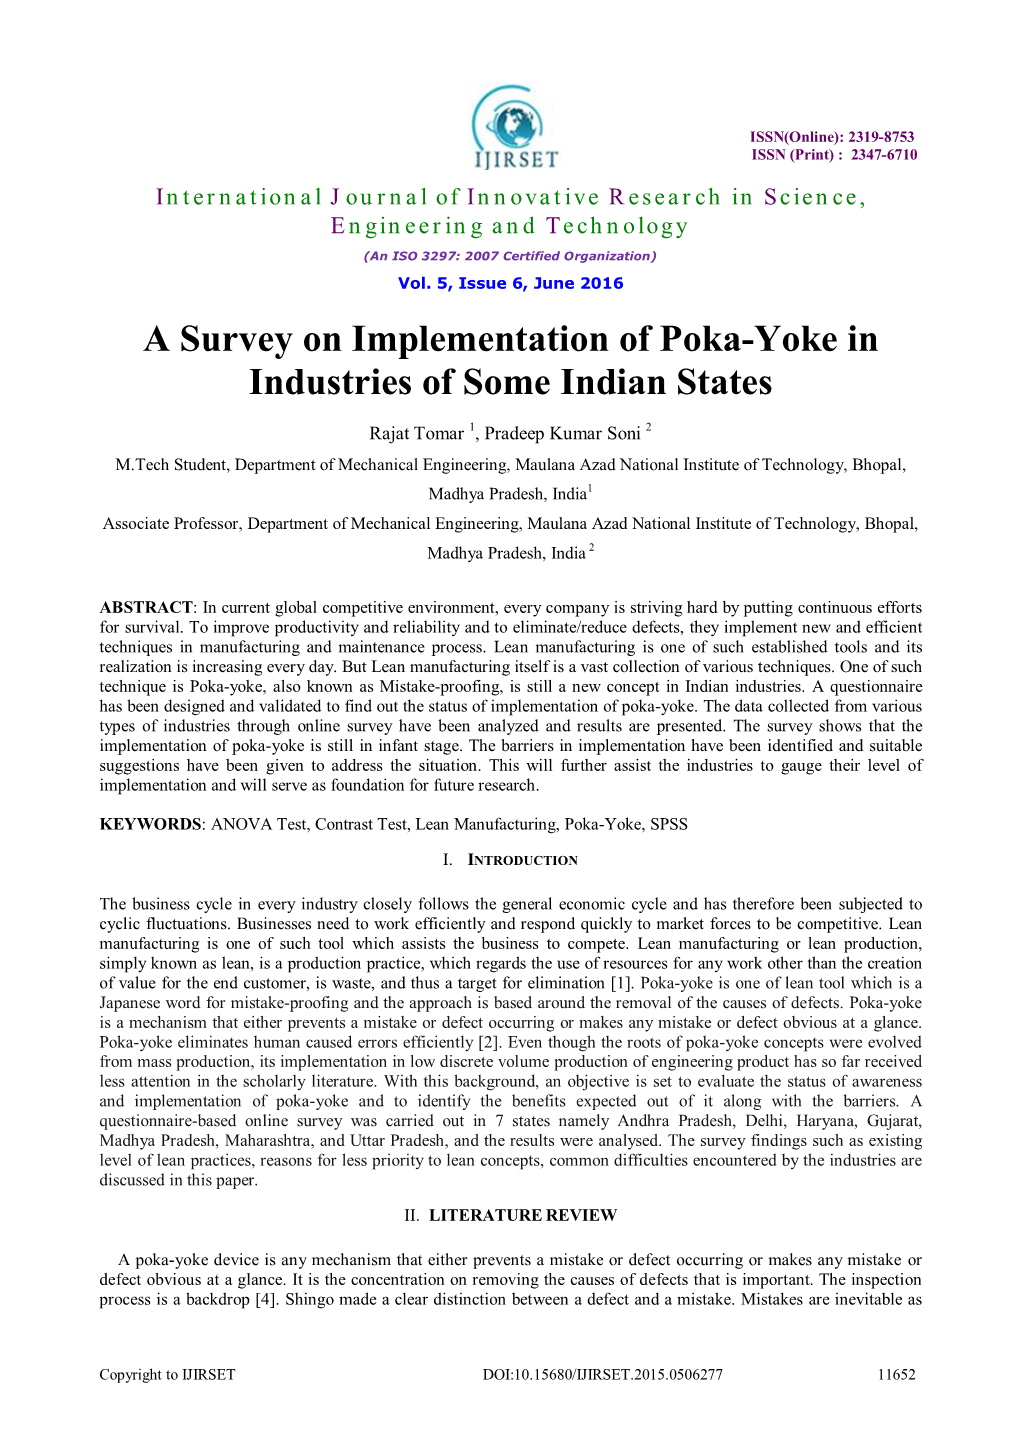 A Survey on Implementation of Poka-Yoke in Industries of Some Indian States